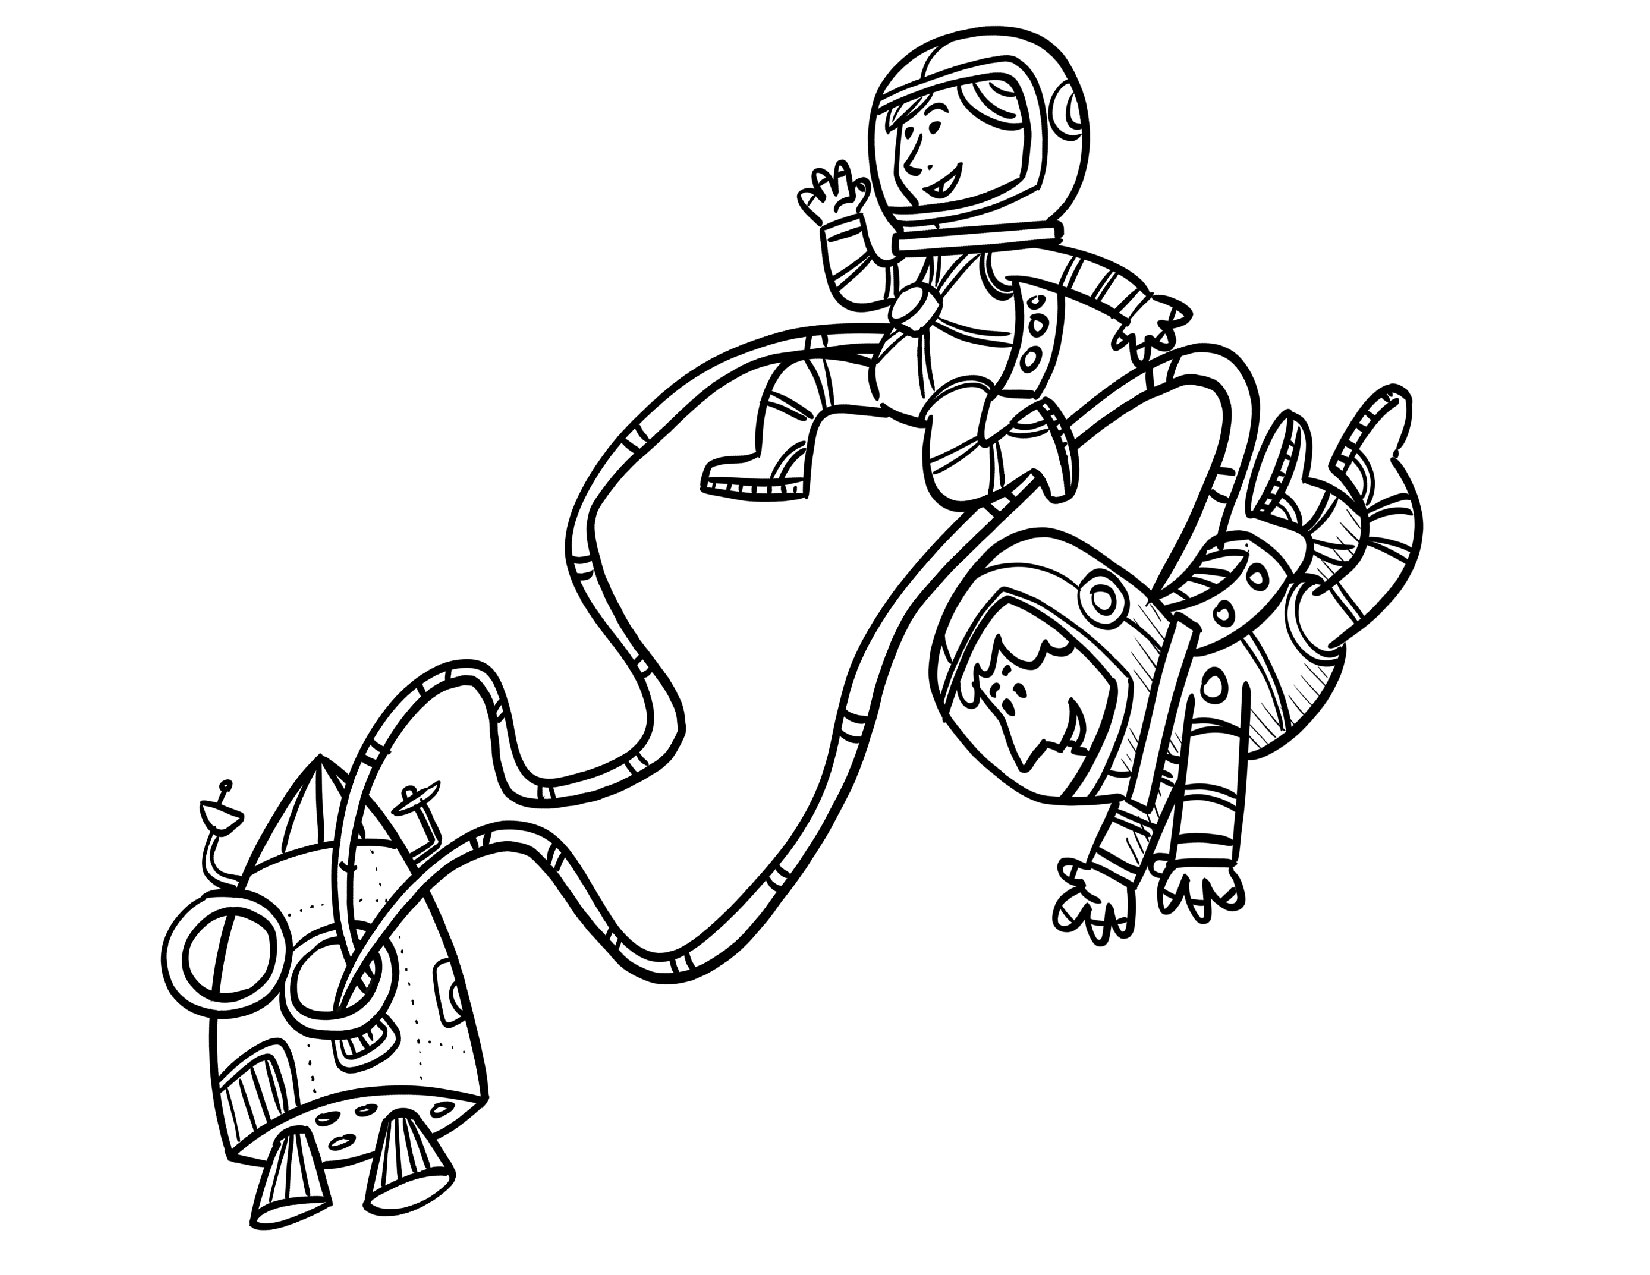 Coloring sheet of two astronauts on a space walk